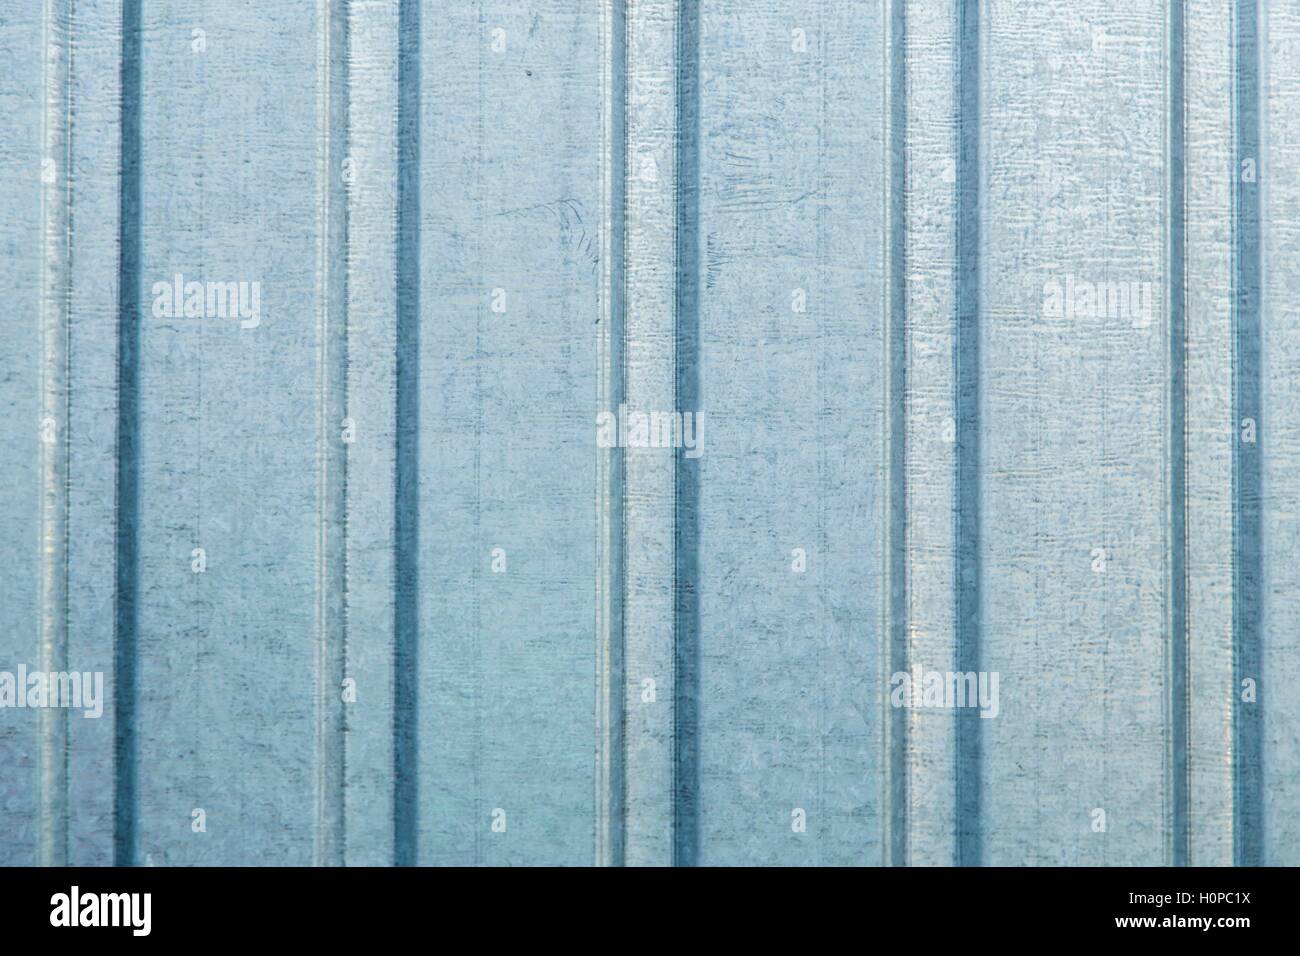 Corrugated metal sheet wall background texture Stock Photo